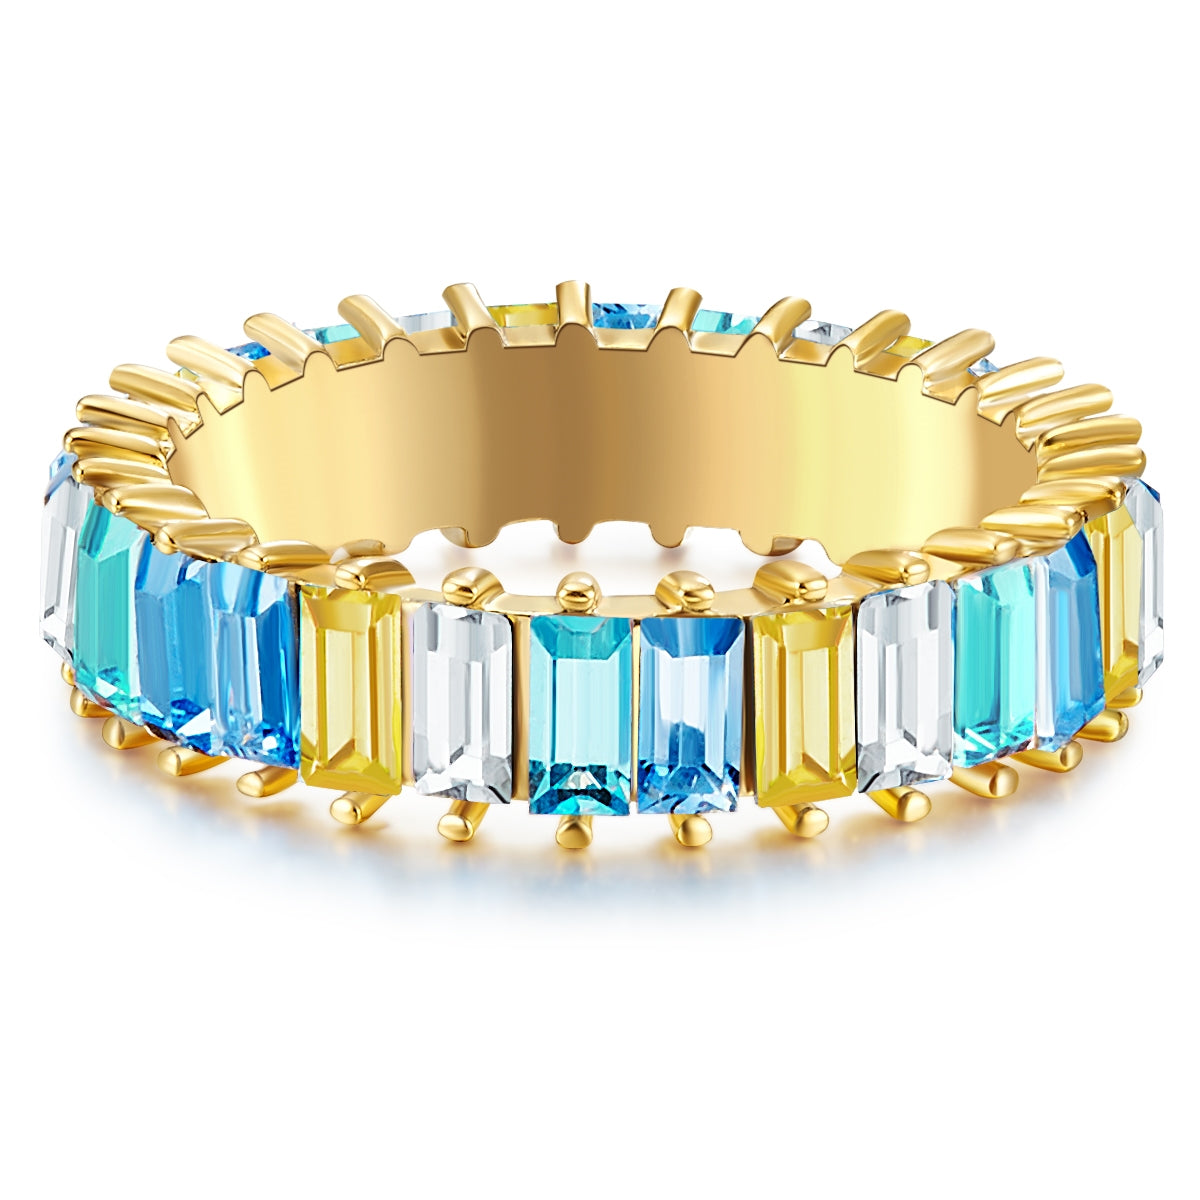 Golden ring with colourful stones | THOMAS SABO